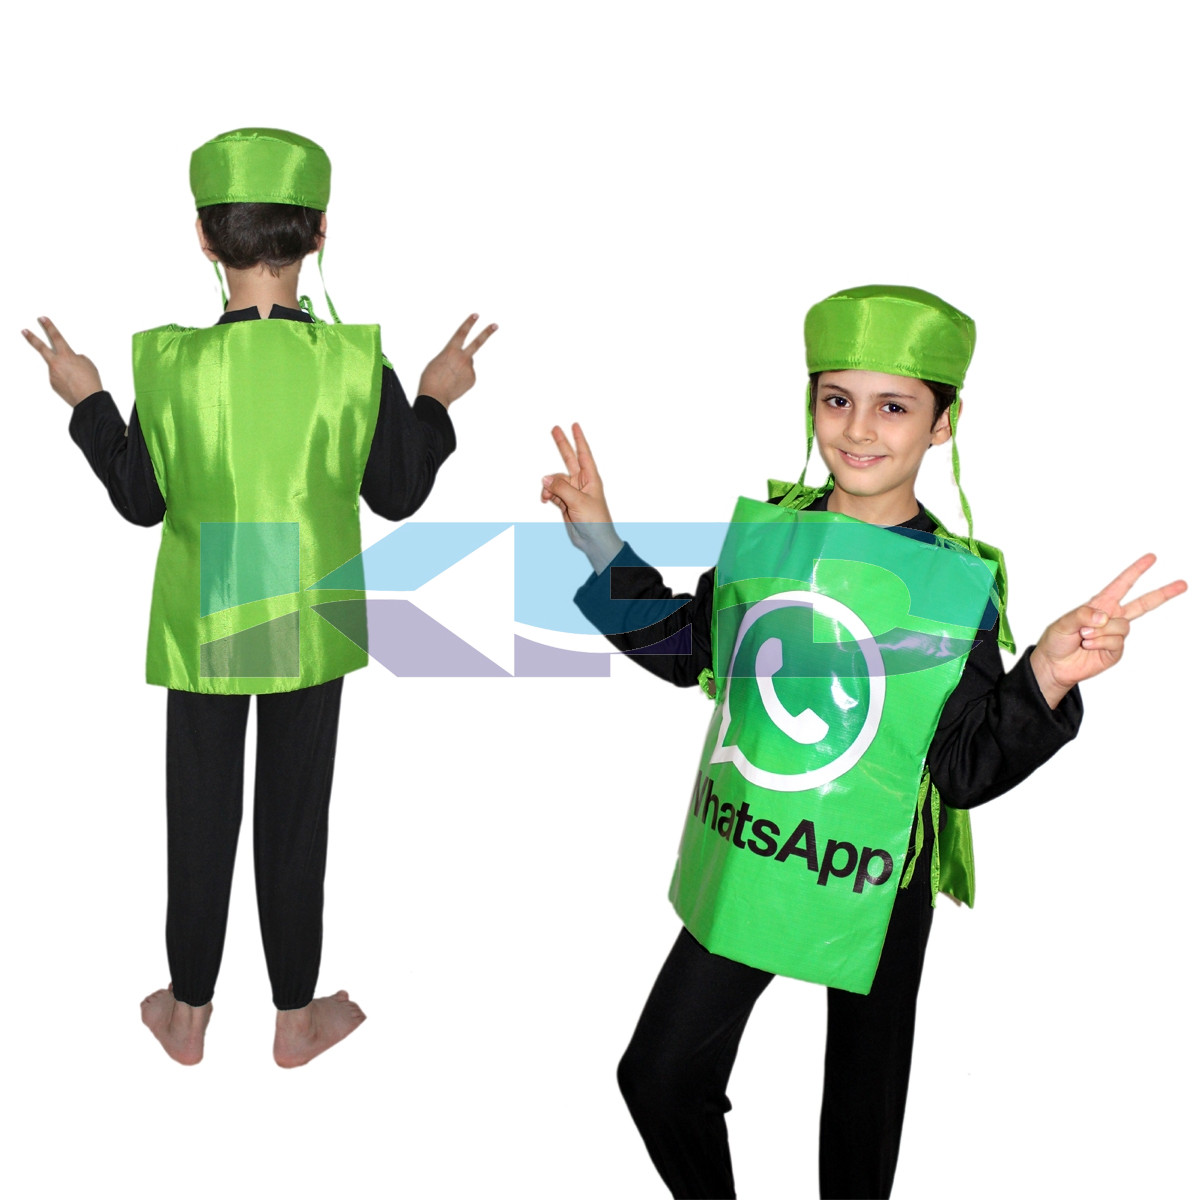  WhatsApp Social Networking Application Costume,Object Costume for School Annual function/Theme Party/Competition/Stage Shows/Birthday Party Dress